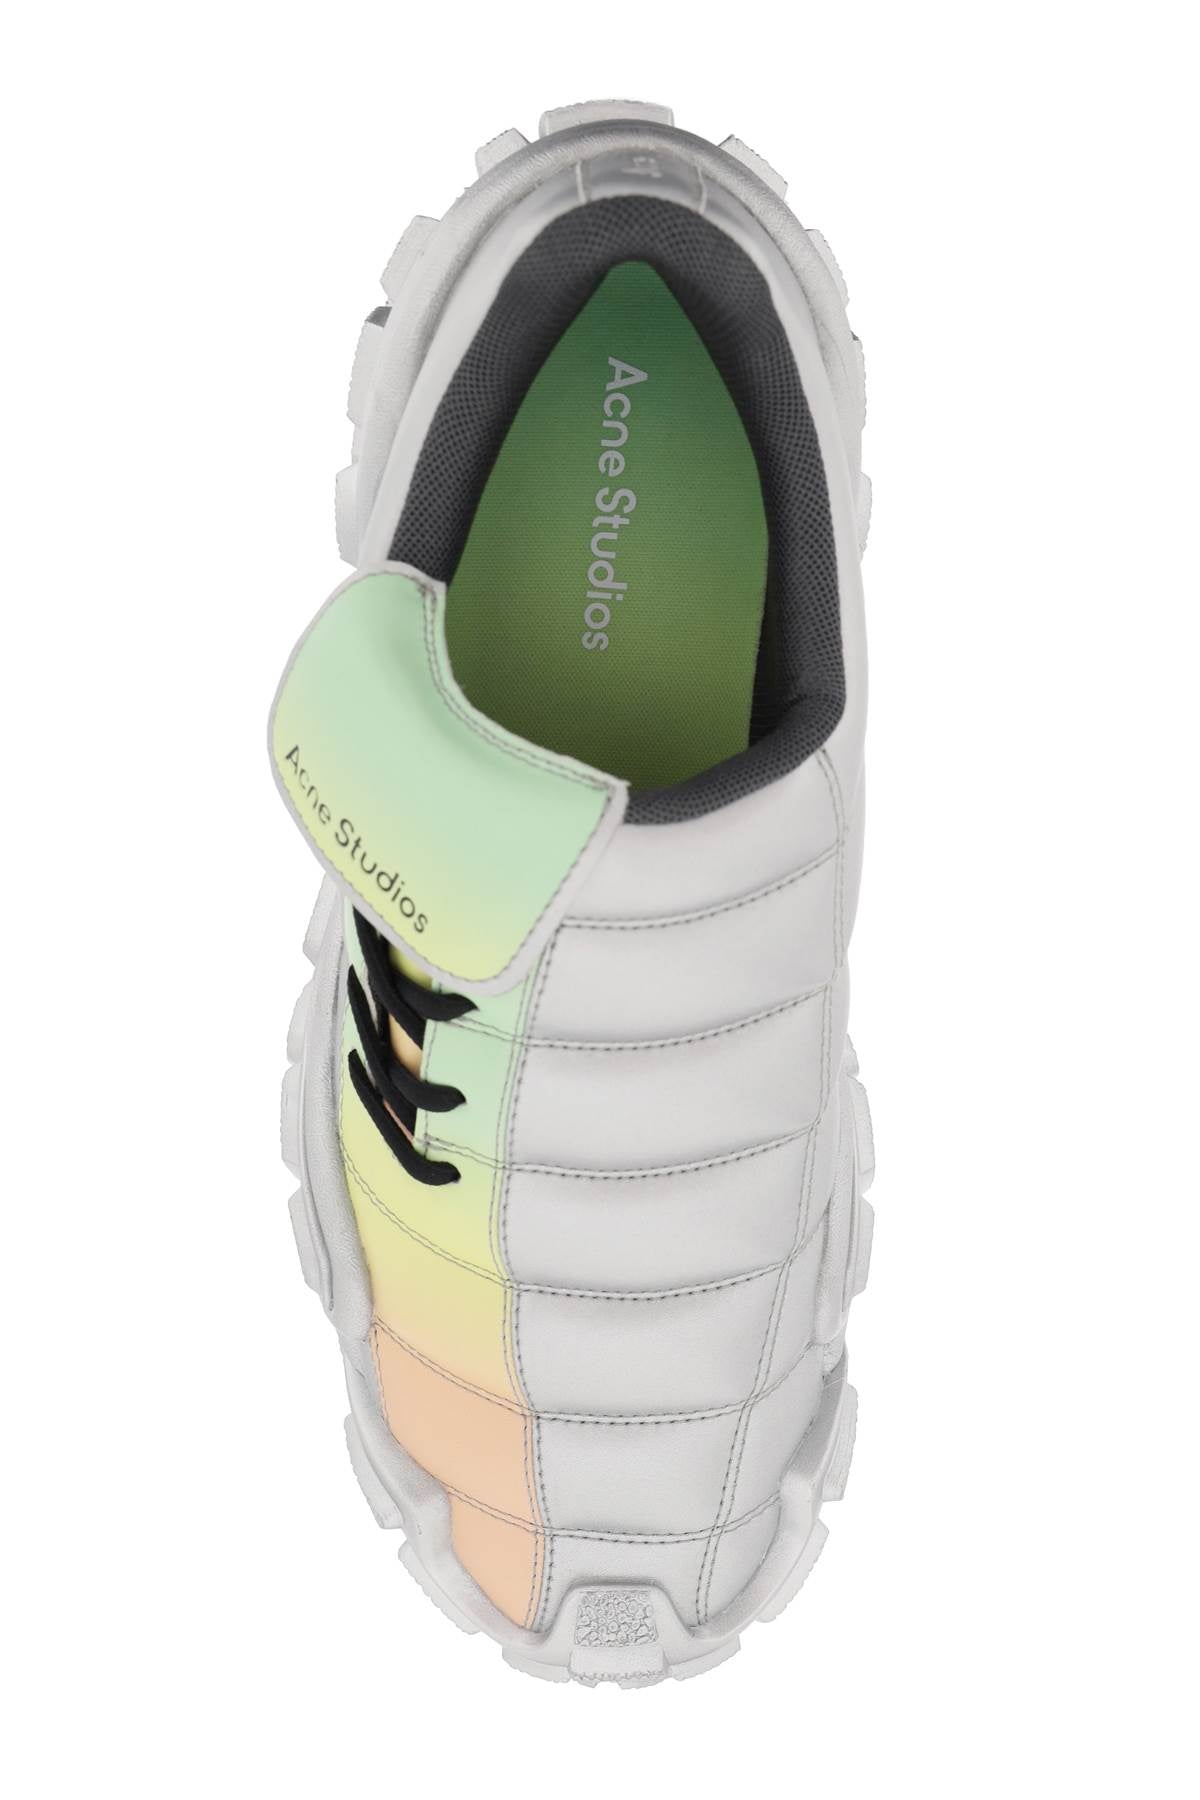 ACNE STUDIOS Multicolored Football-Inspired Faux Leather Sneaker for Men